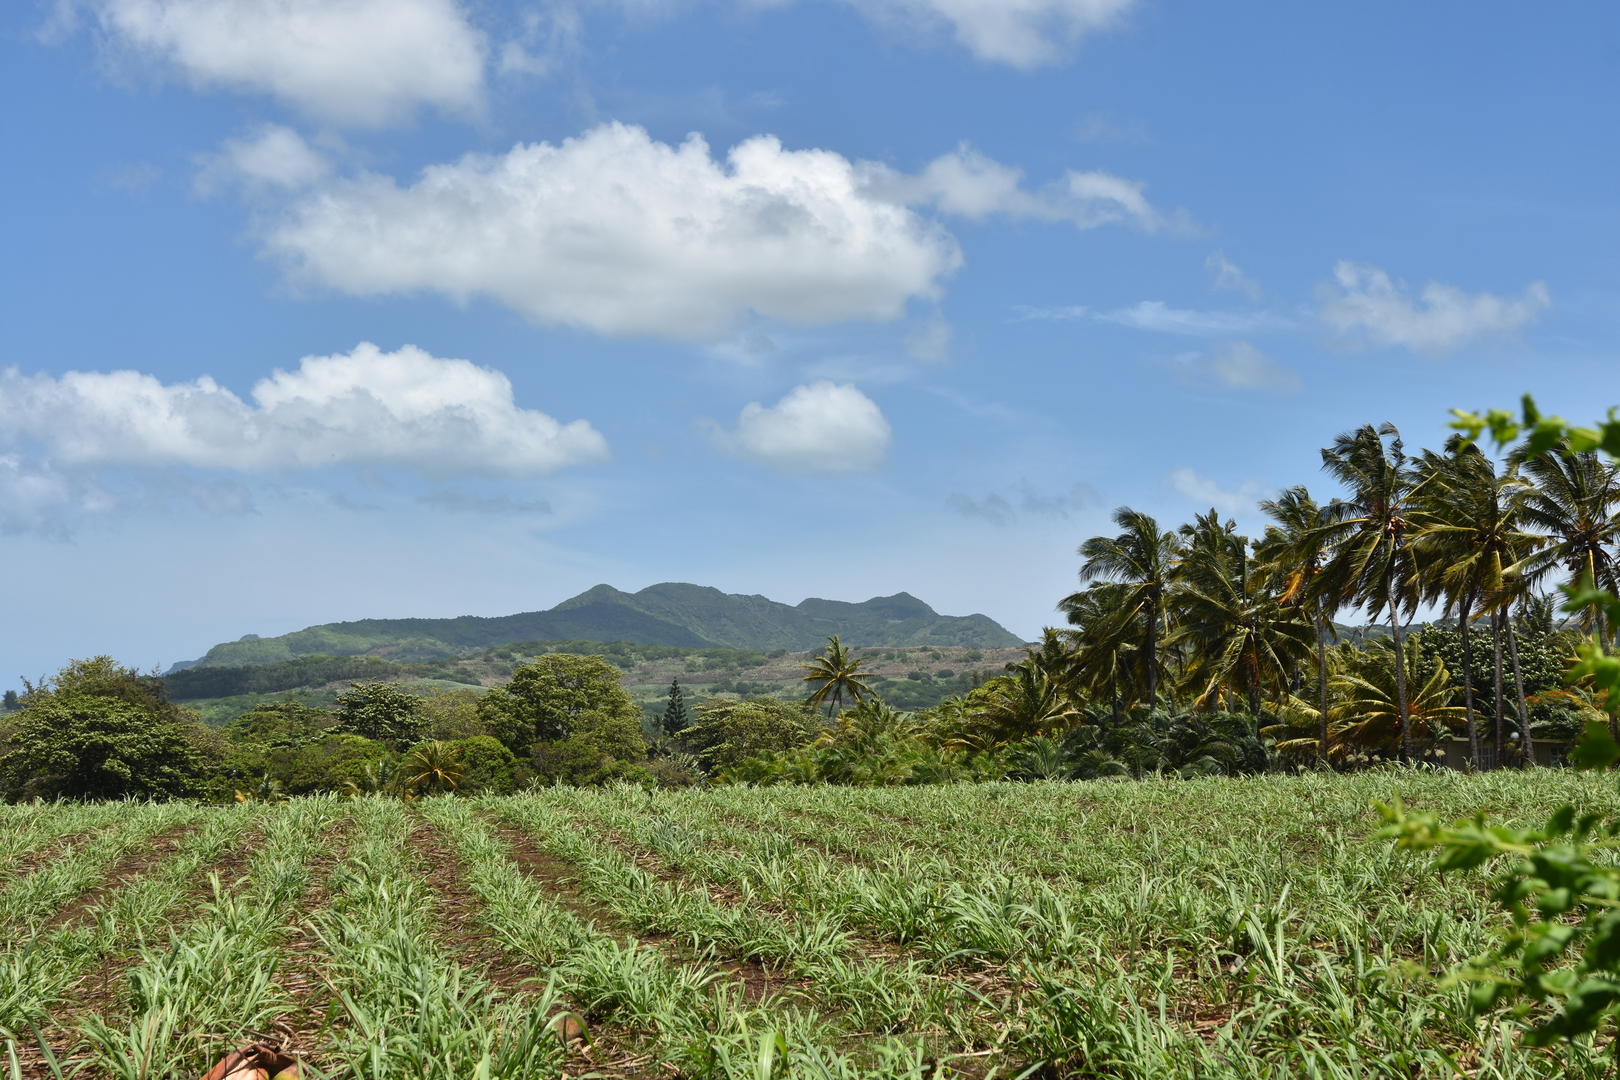 The south coast road by Pointe aux Roches :: meanwhile, in the interior, the sugar cane grows